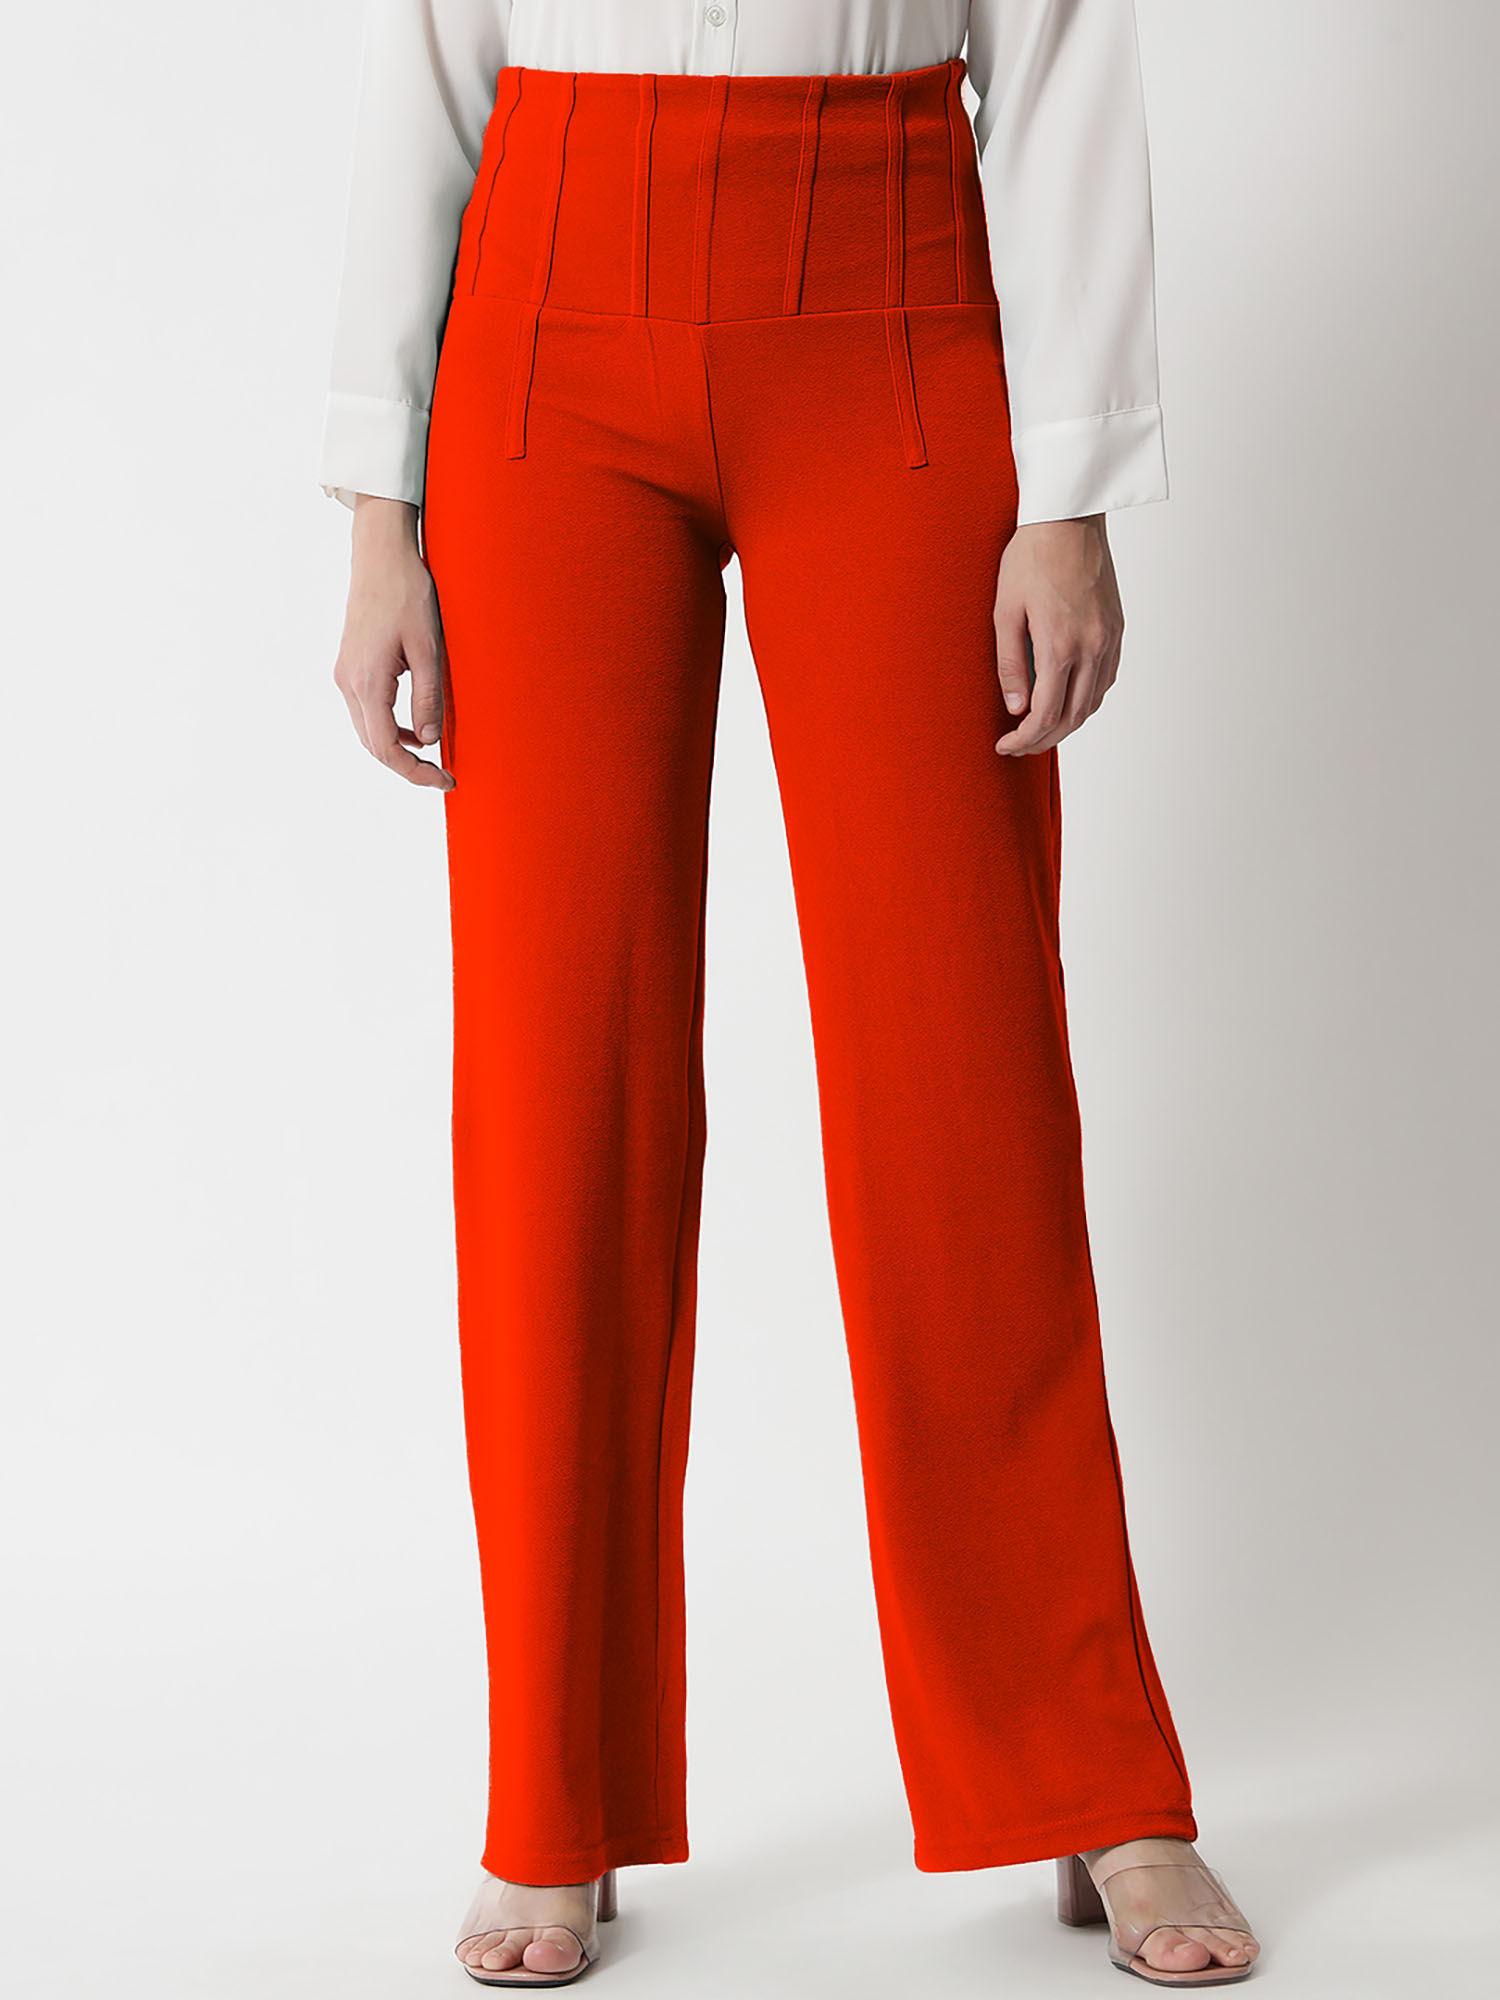 women's solid polyester blend flame orange trouser